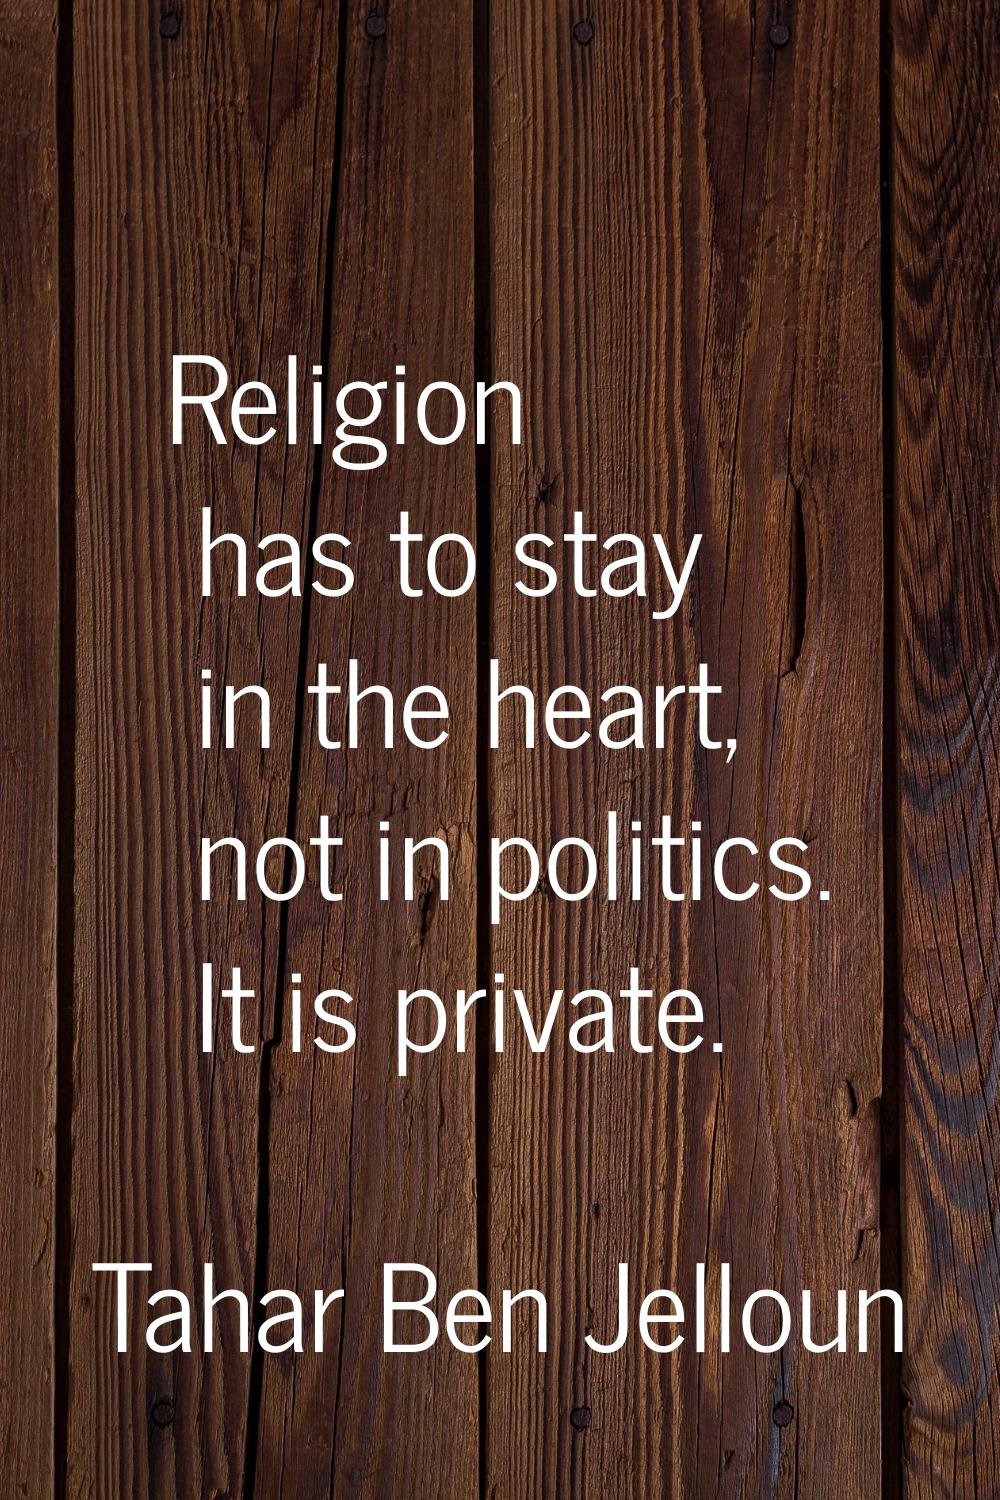 Religion has to stay in the heart, not in politics. It is private.